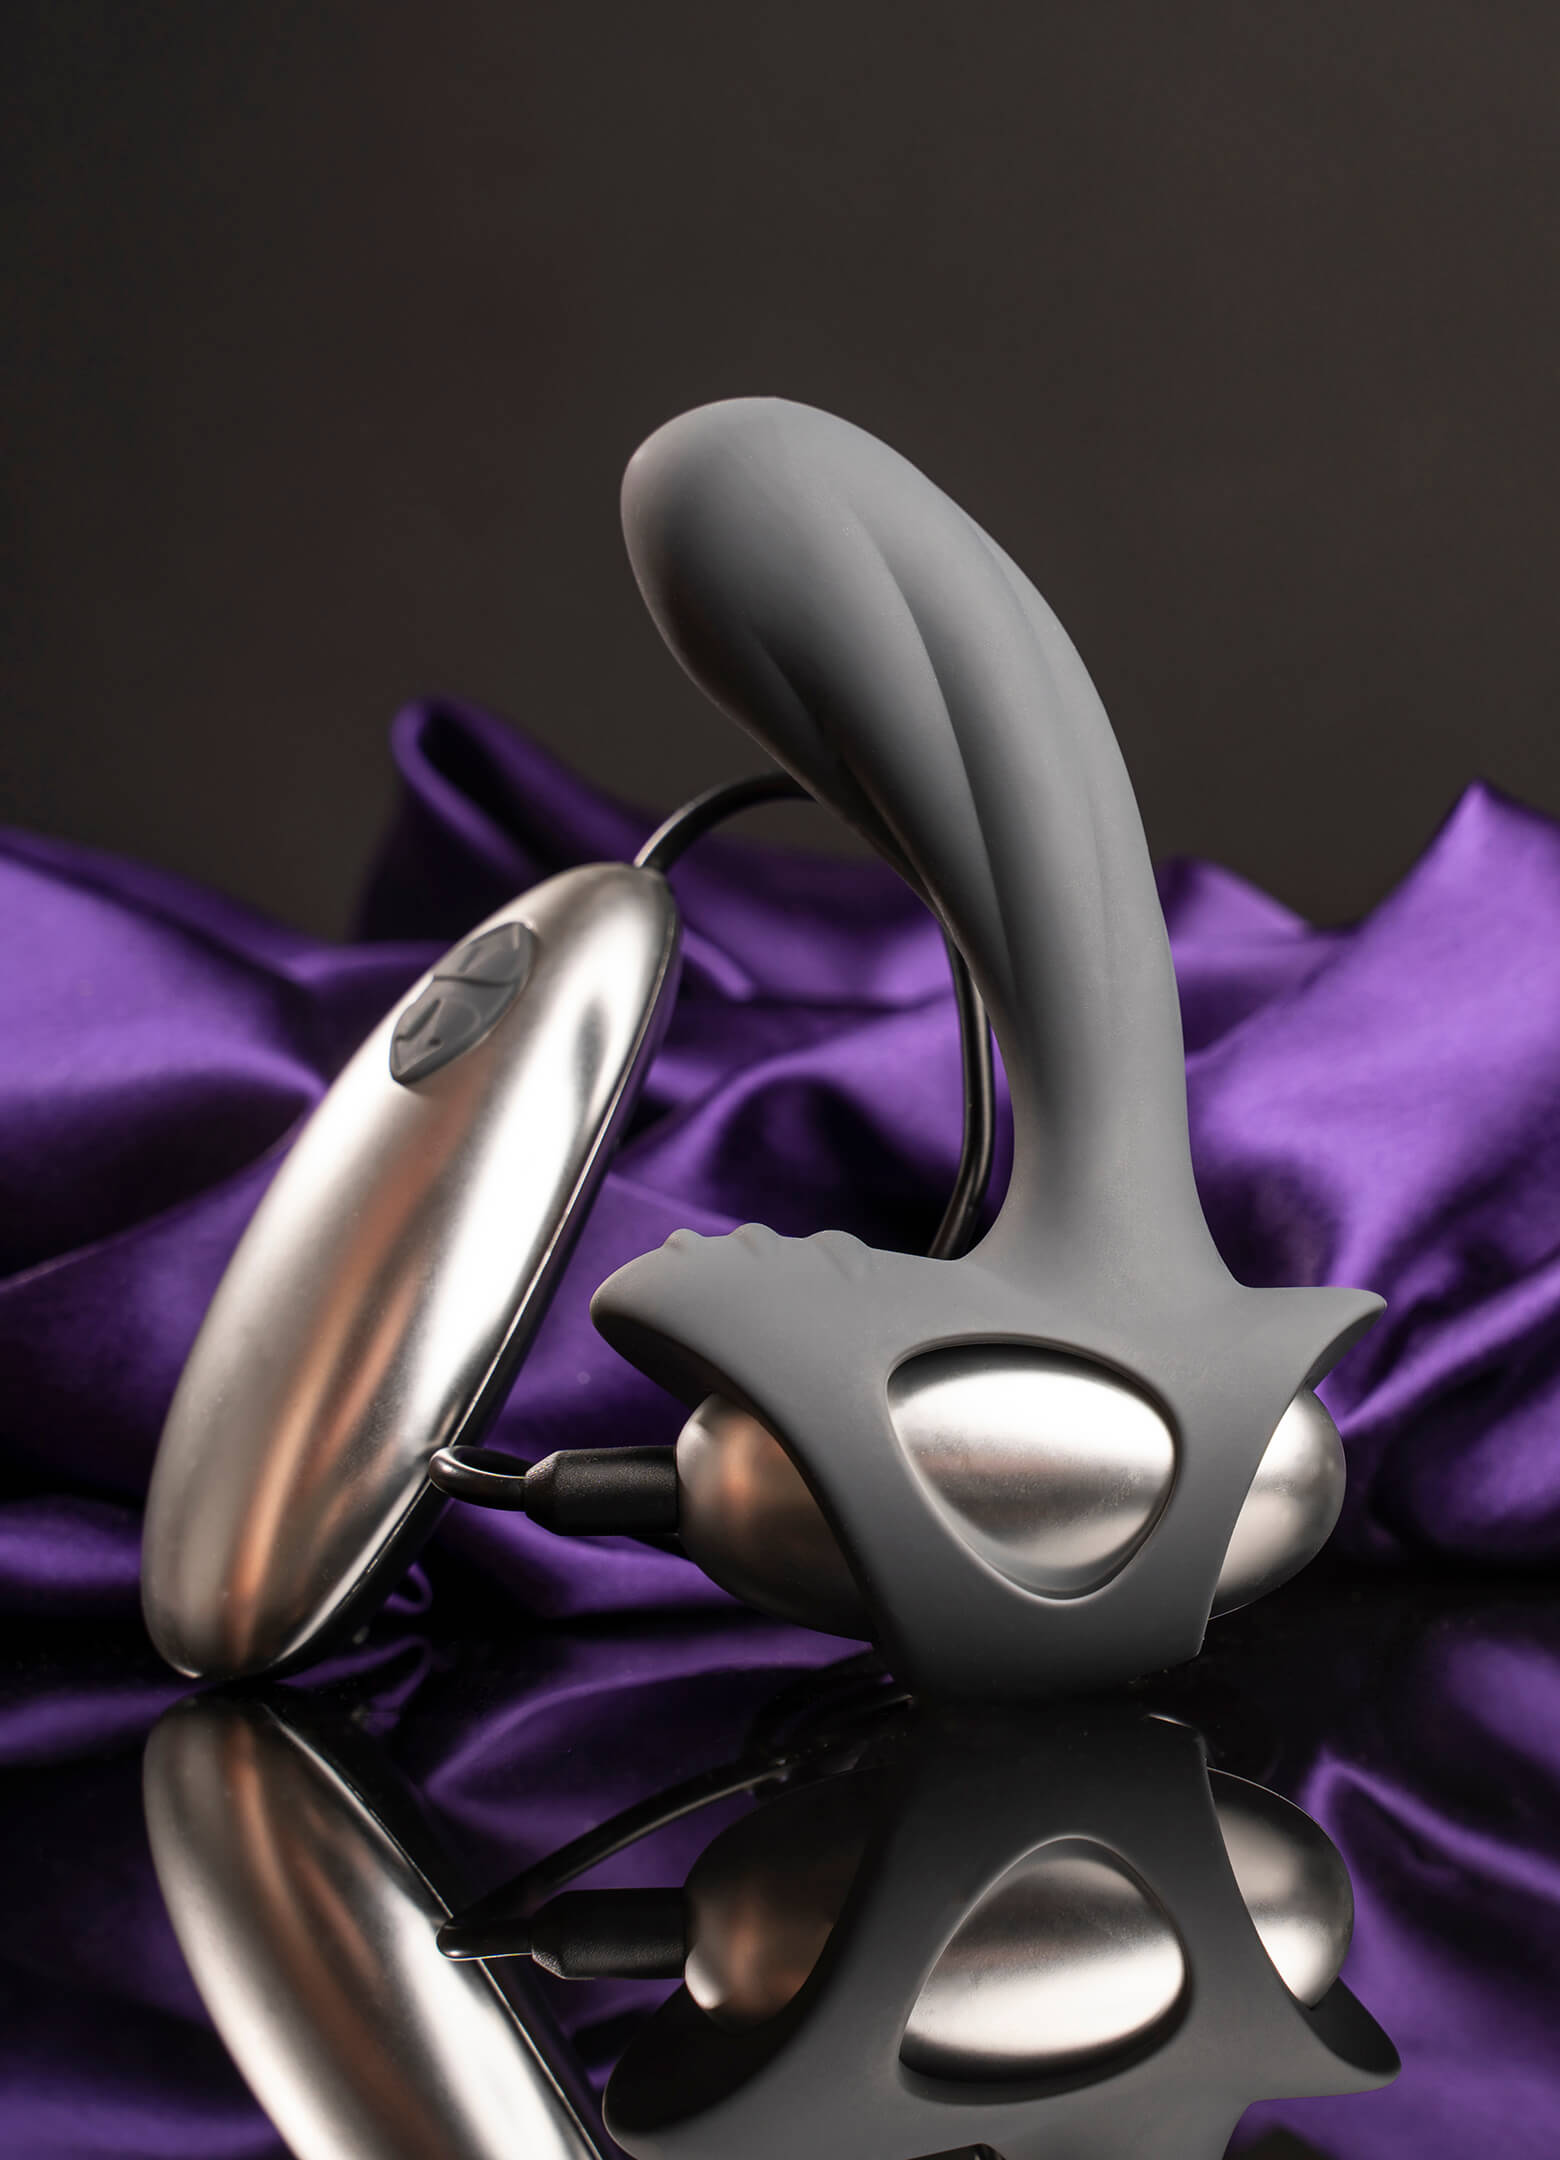 Remote controlled grey prostate vibrator with a rippled perineum pleasure point.